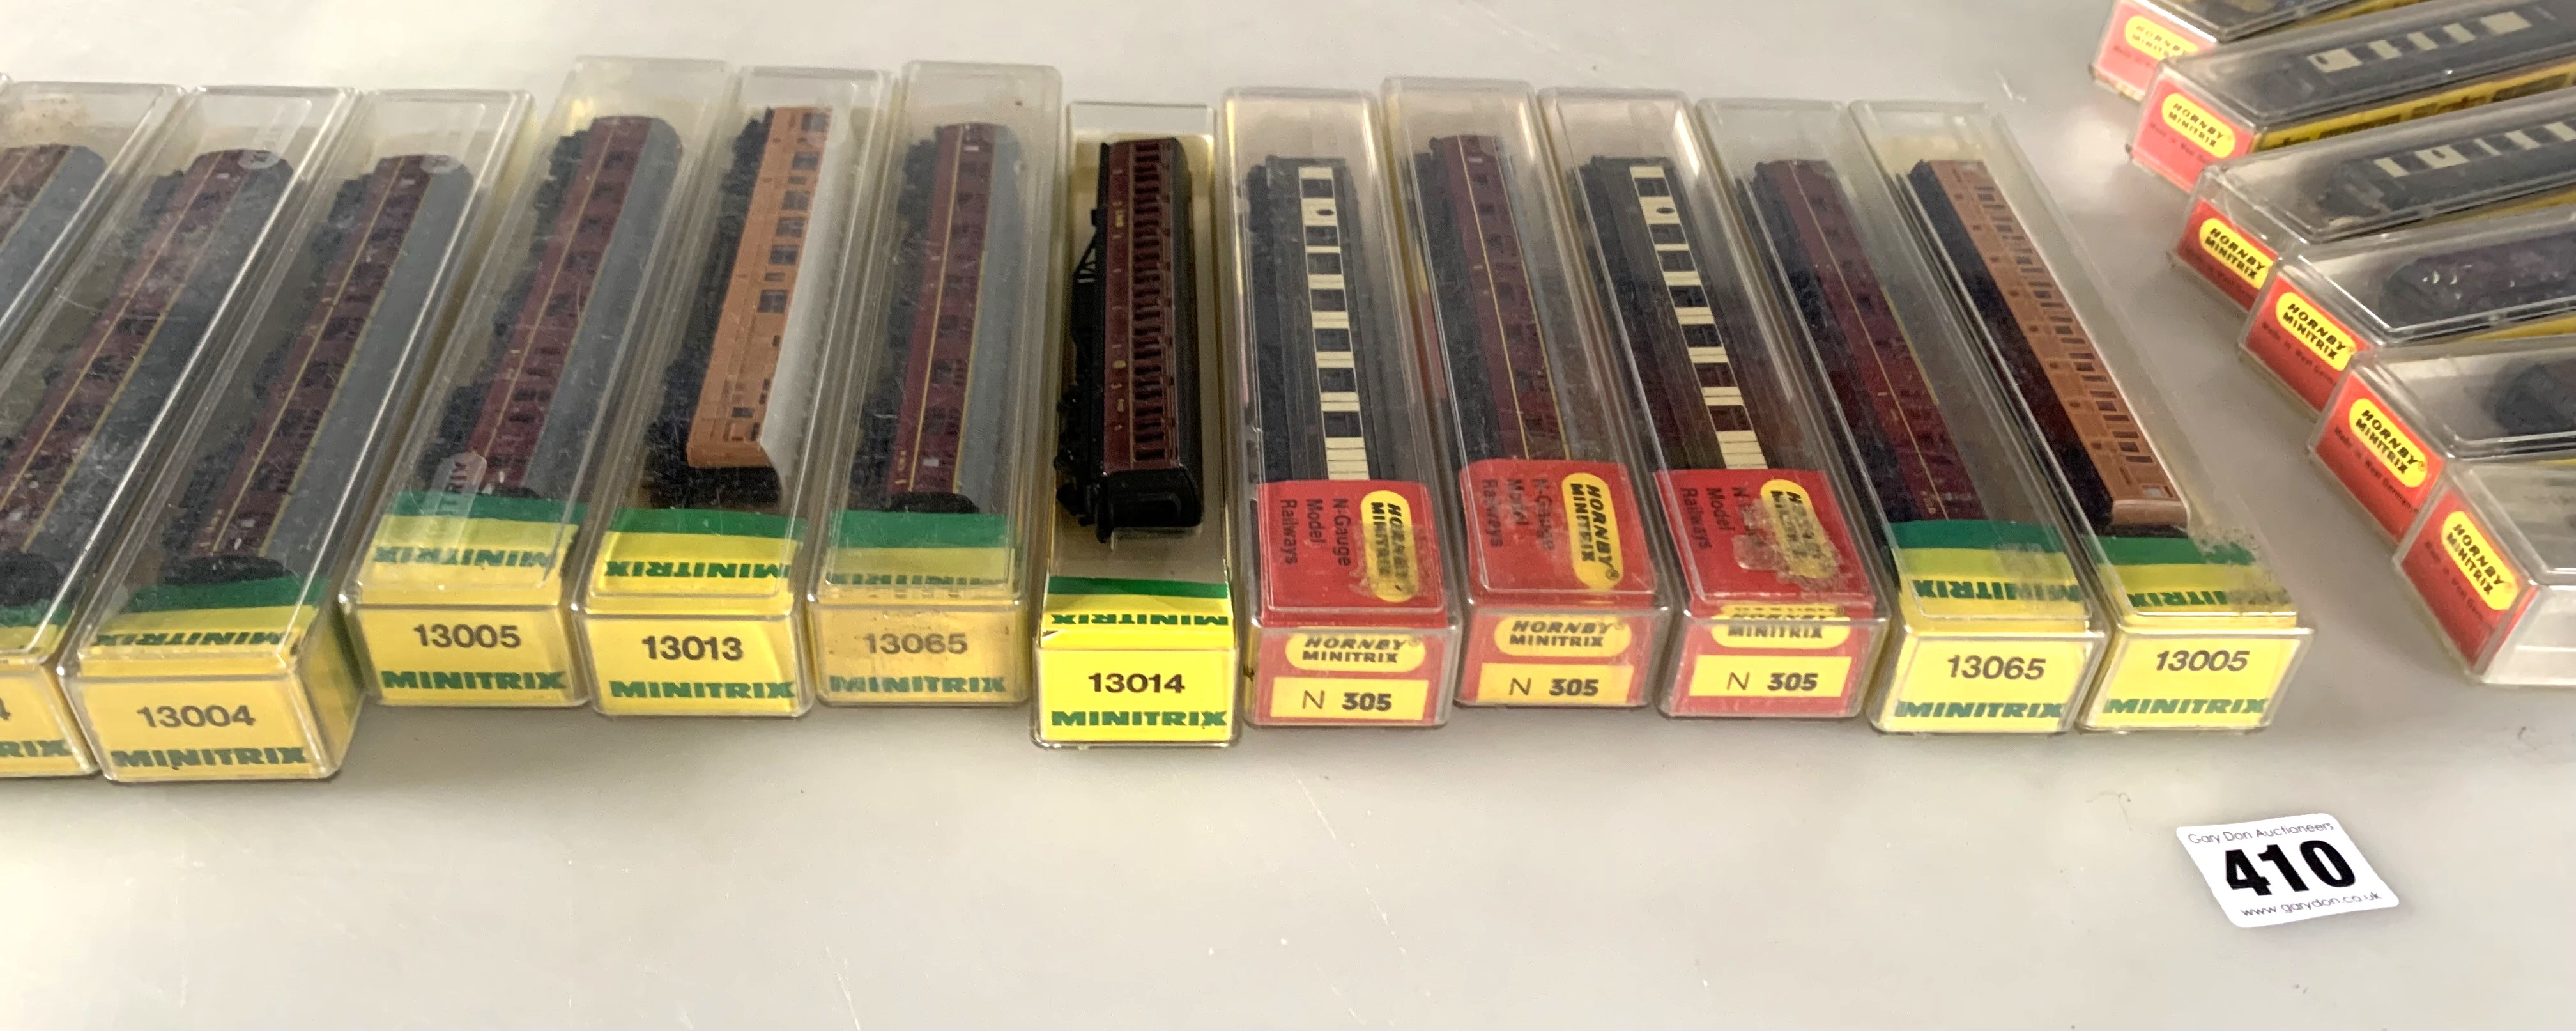 Hornby Minitrix railway carriages - Image 5 of 6